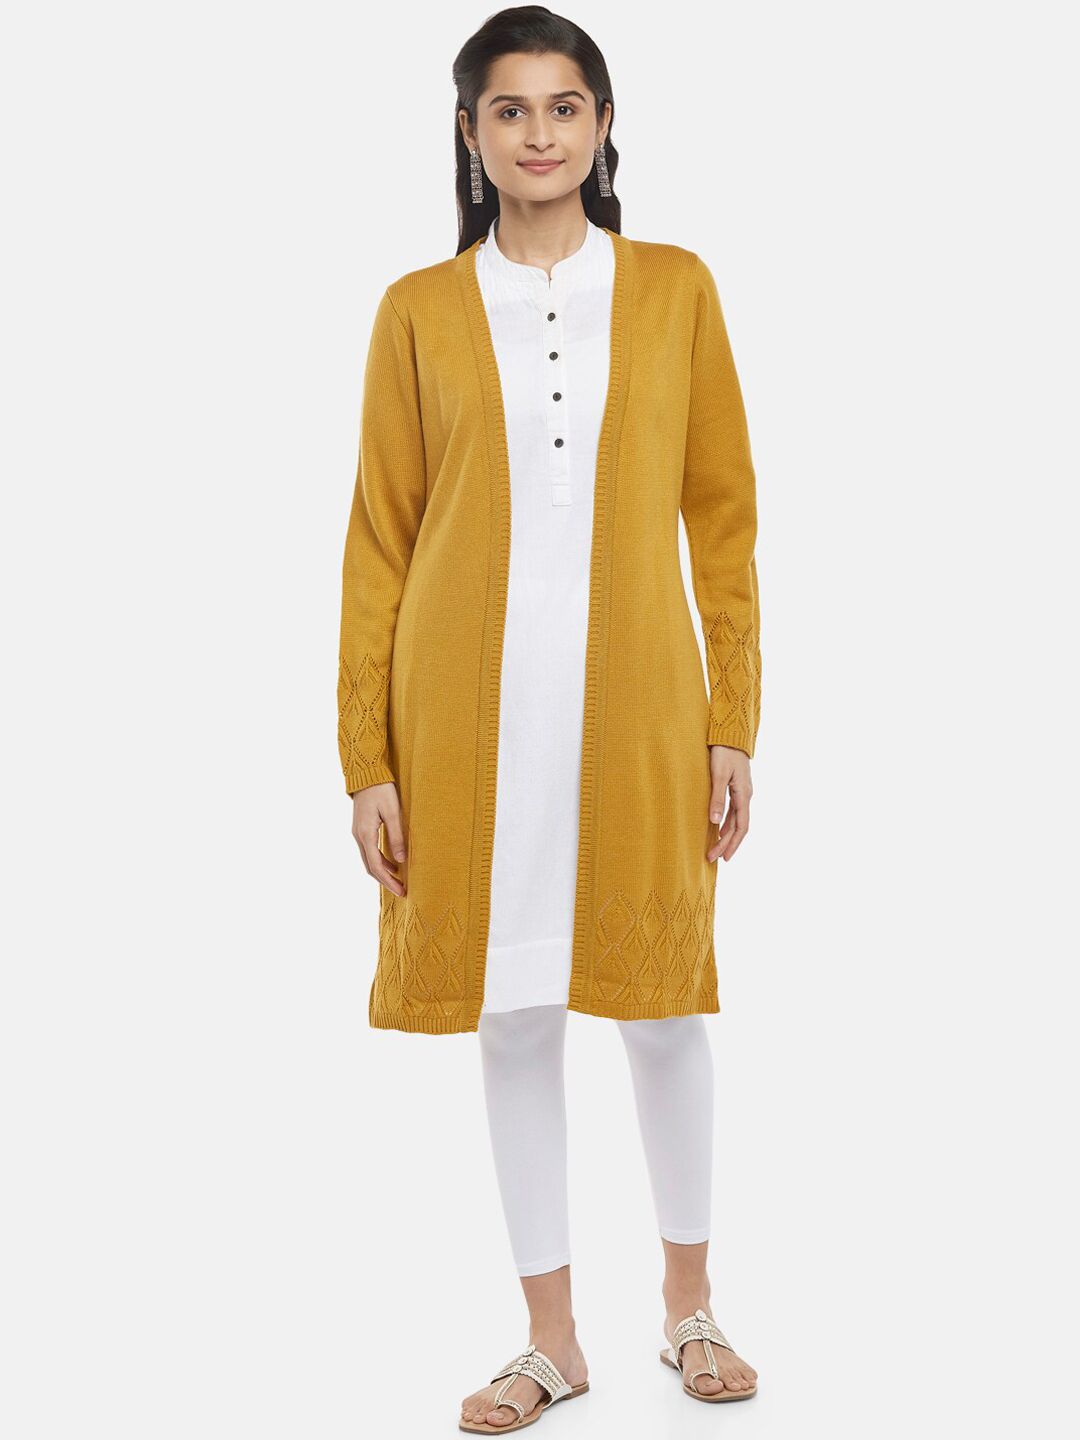 RANGMANCH BY PANTALOONS Women Mustard Acrylic Longline Open Front Jacket Price in India